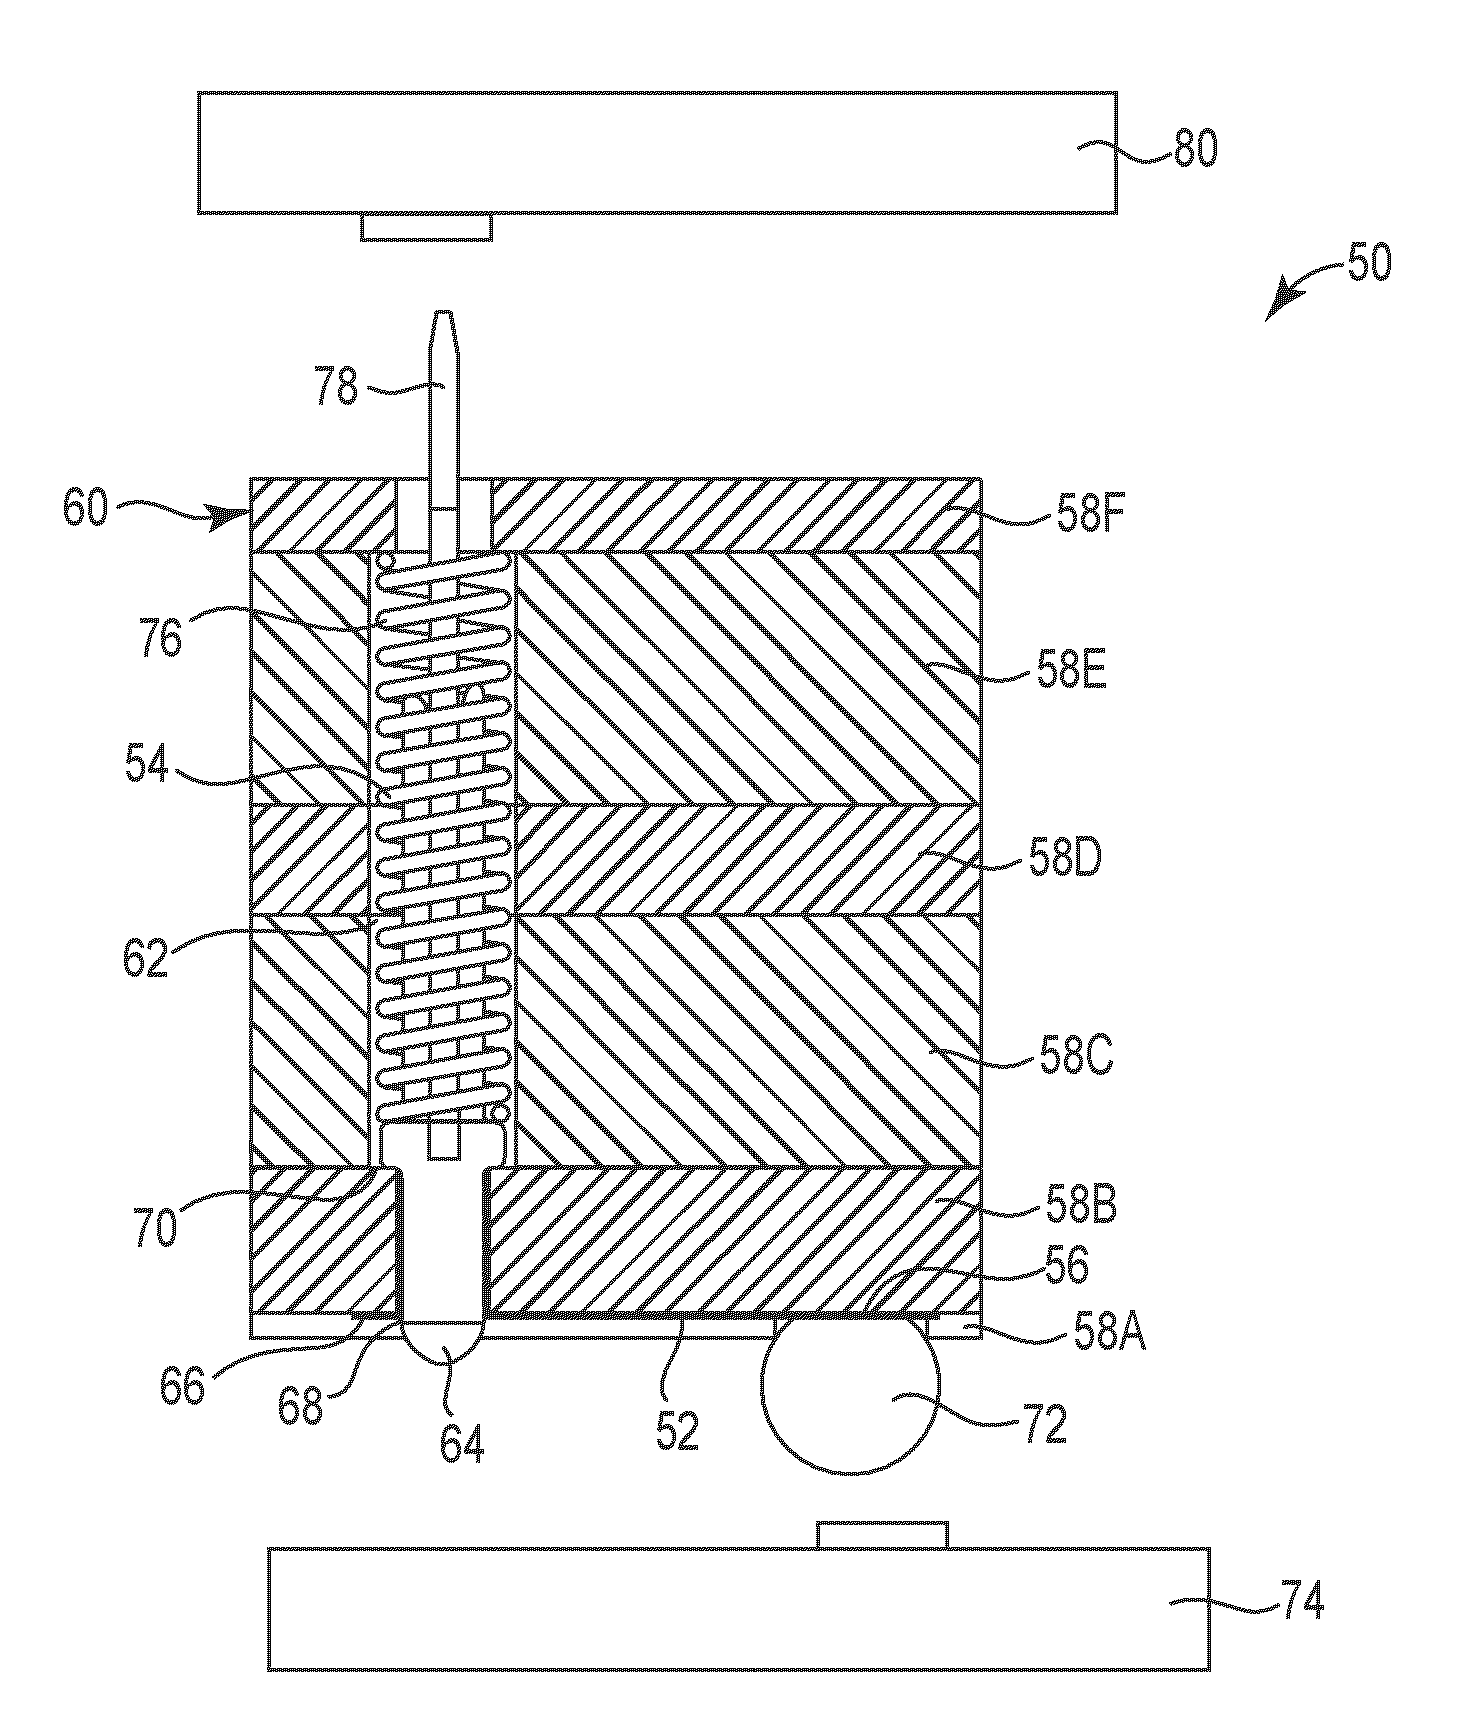 Metalized pad to electrical contact interface